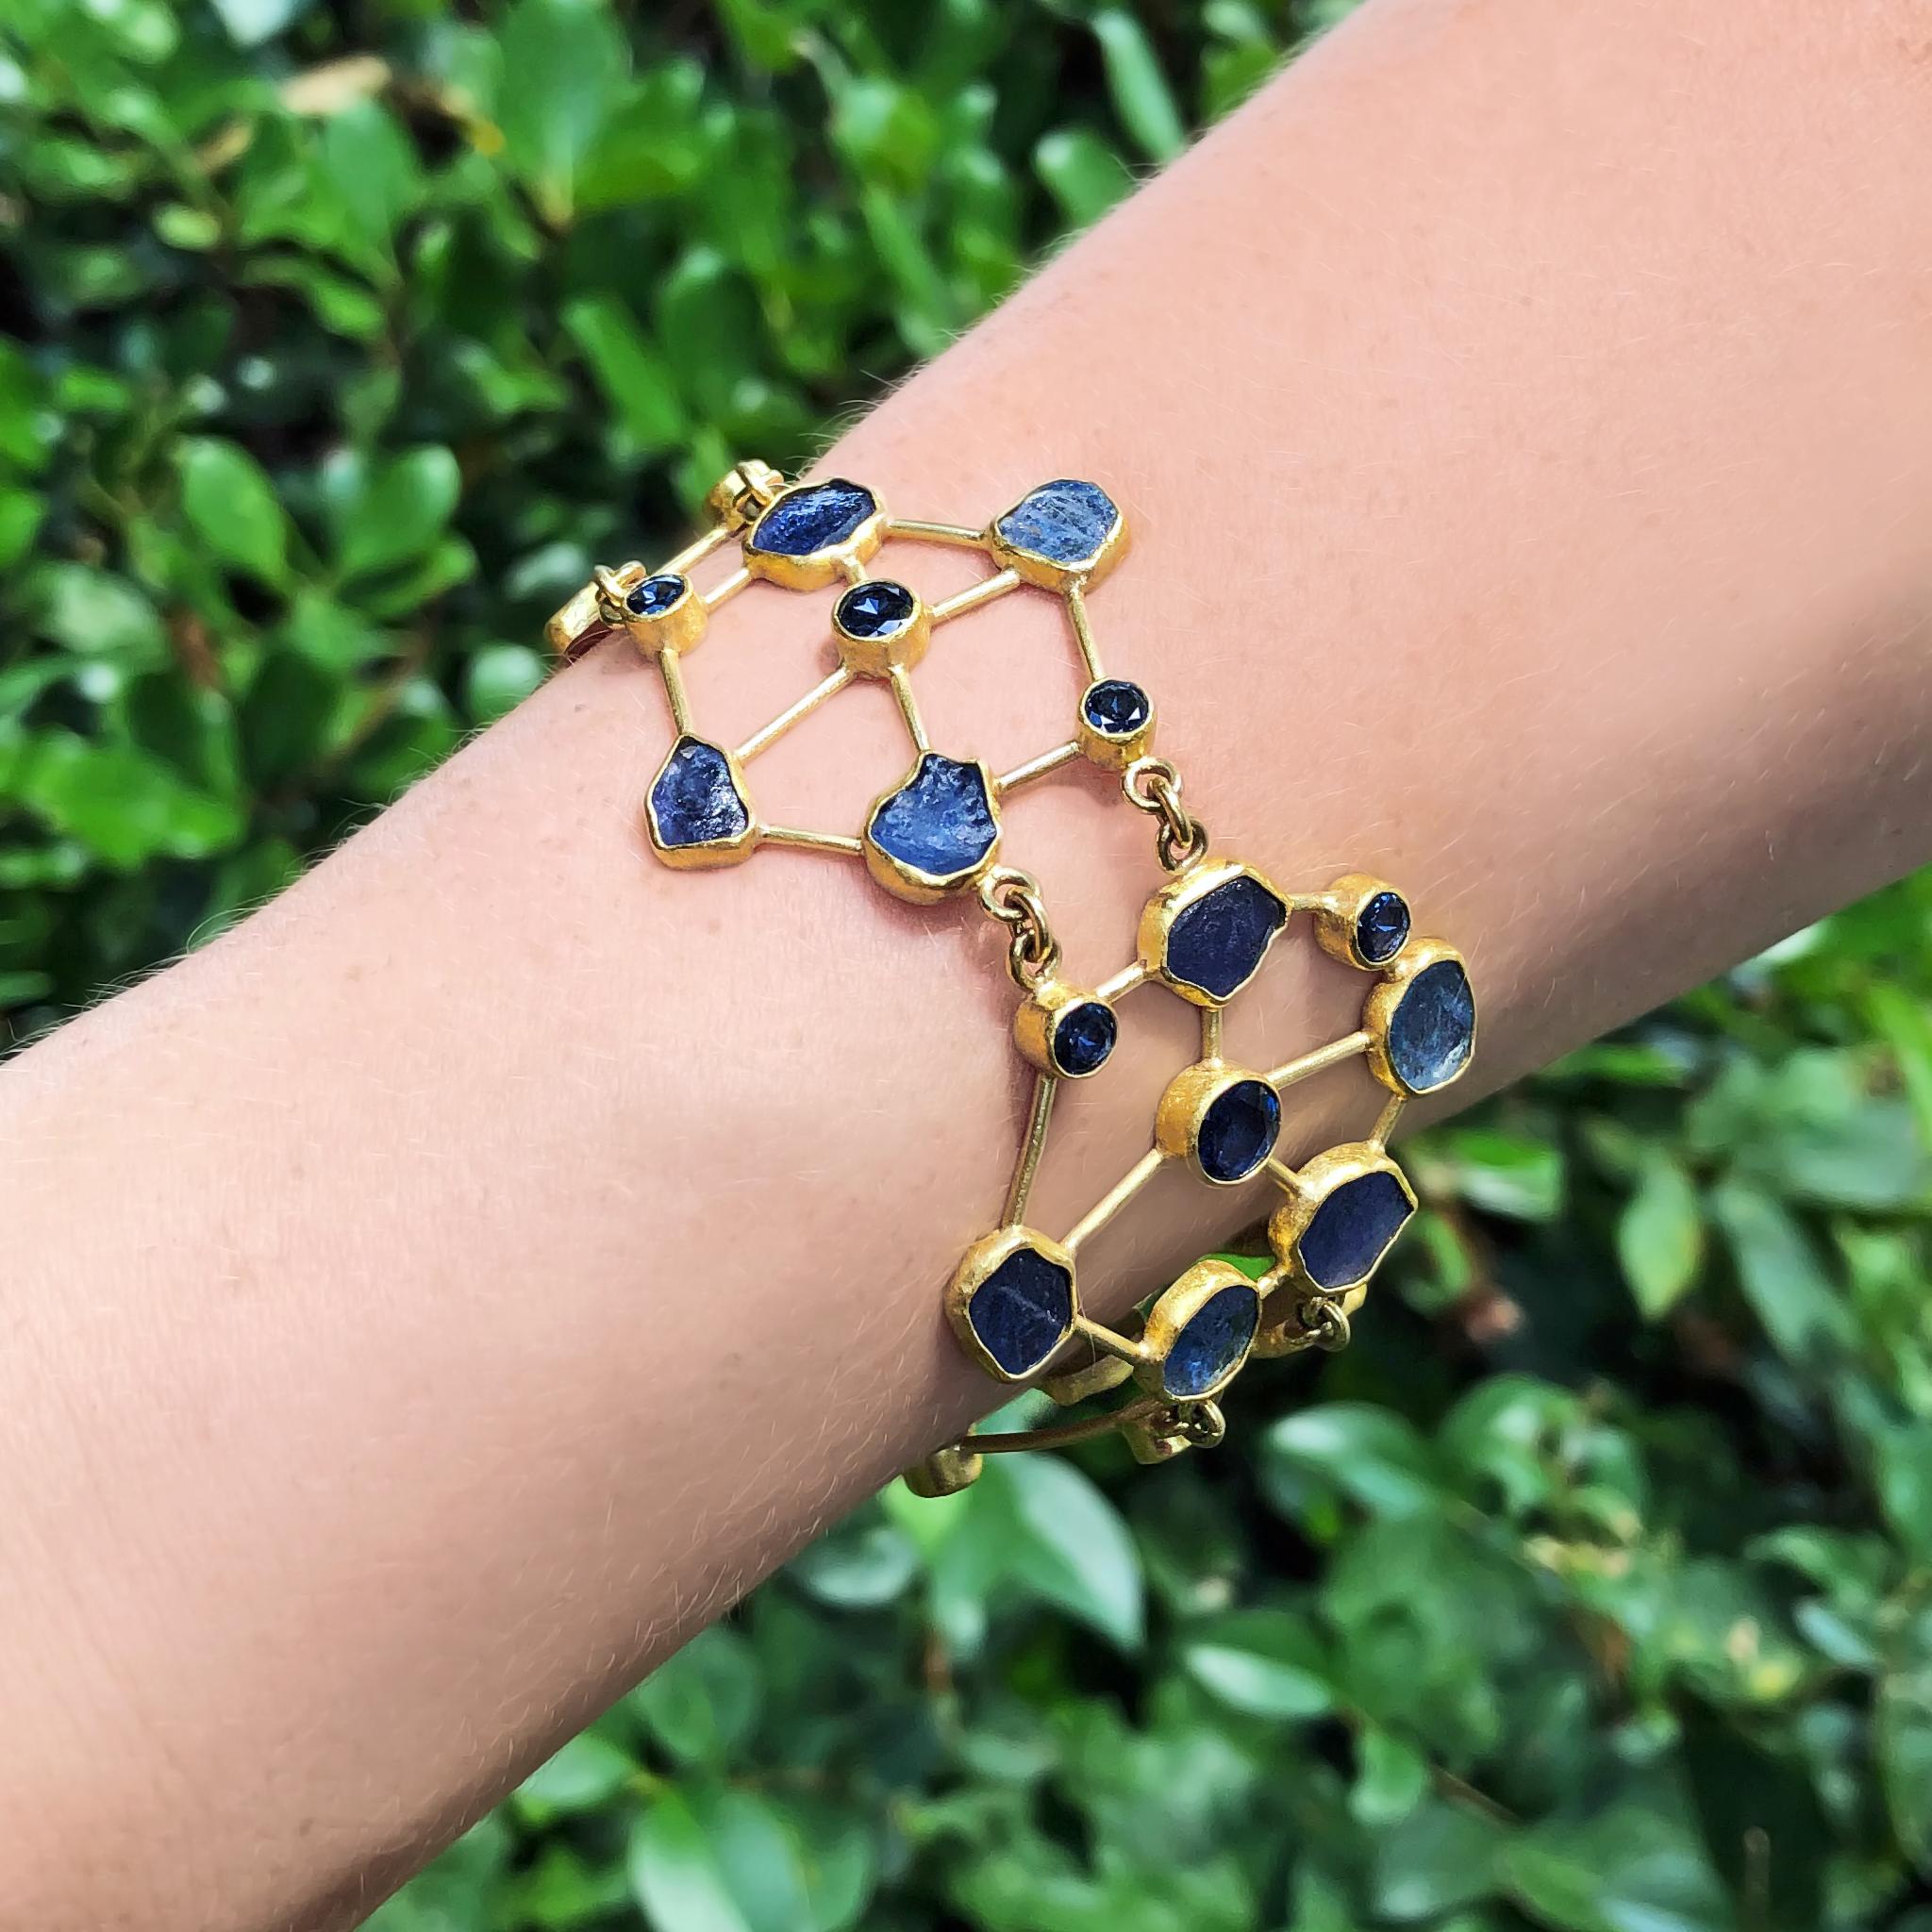 A one of a kind, wearable work of art by acclaimed jewelry maker Petra Class, the Pinwheels Bracelet is handmade in signature-finished 22k yellow gold and showcases 4.31 total carats of round faceted blue Montana sapphire and 22.70 total carats of